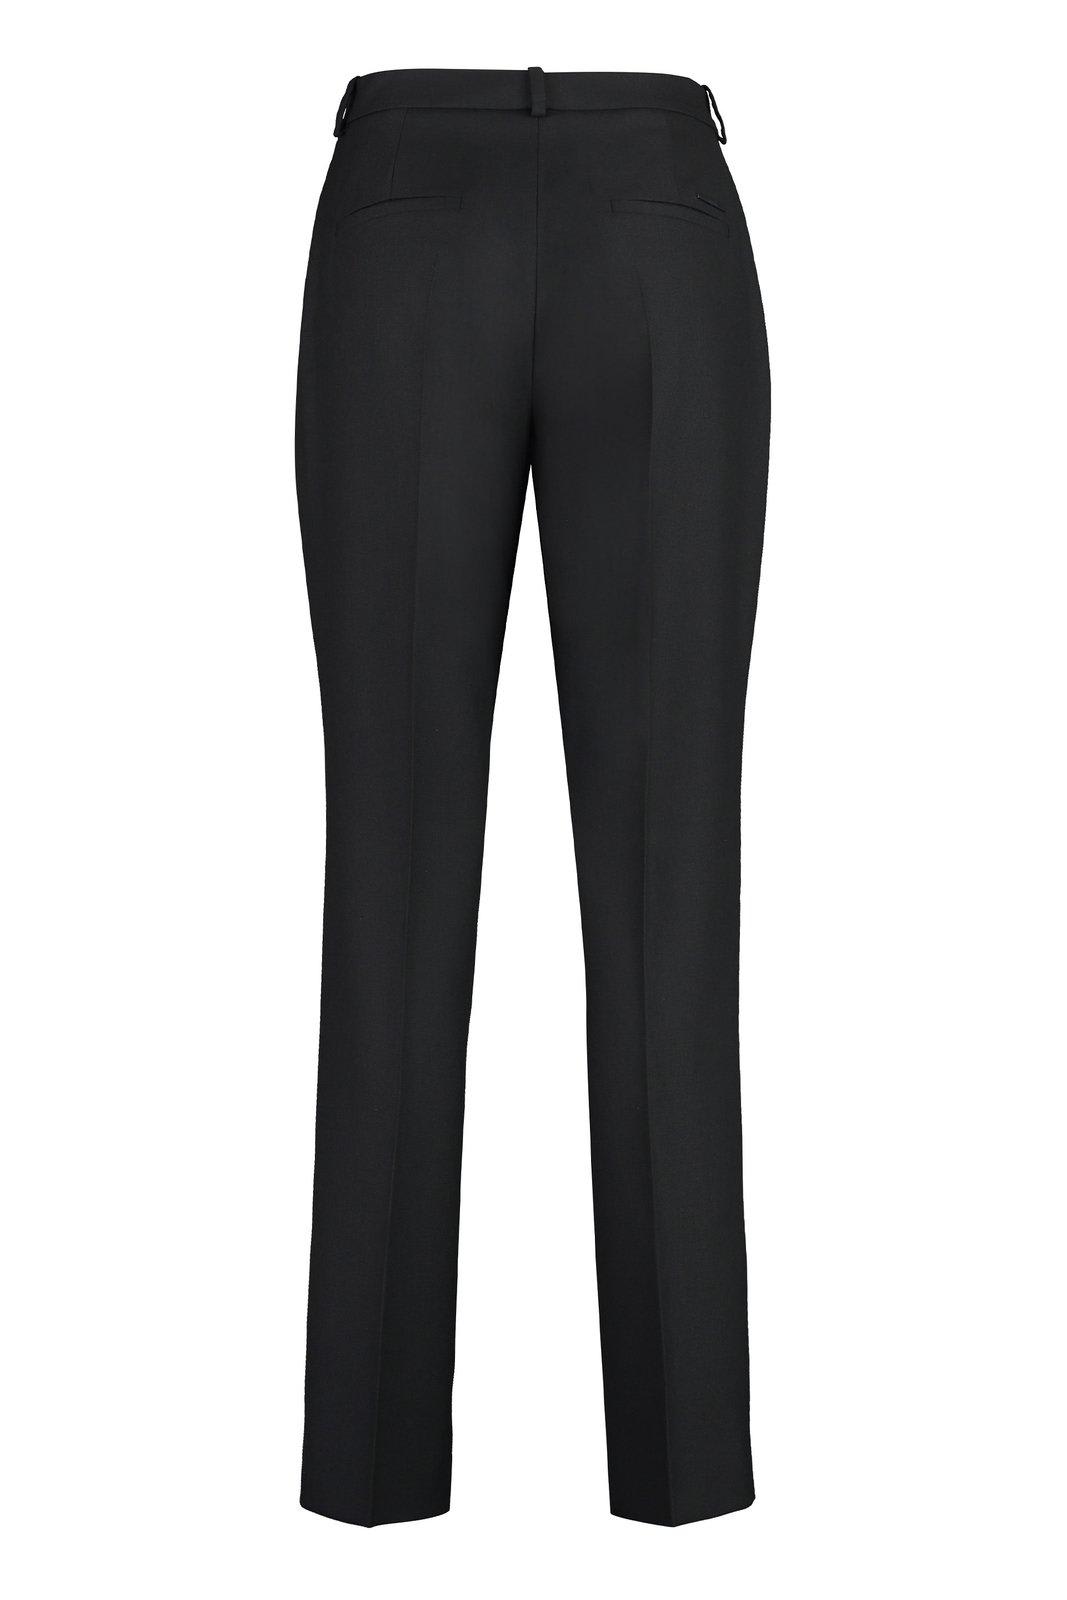 Shop Calvin Klein Pleat Tailored Trousers In Black